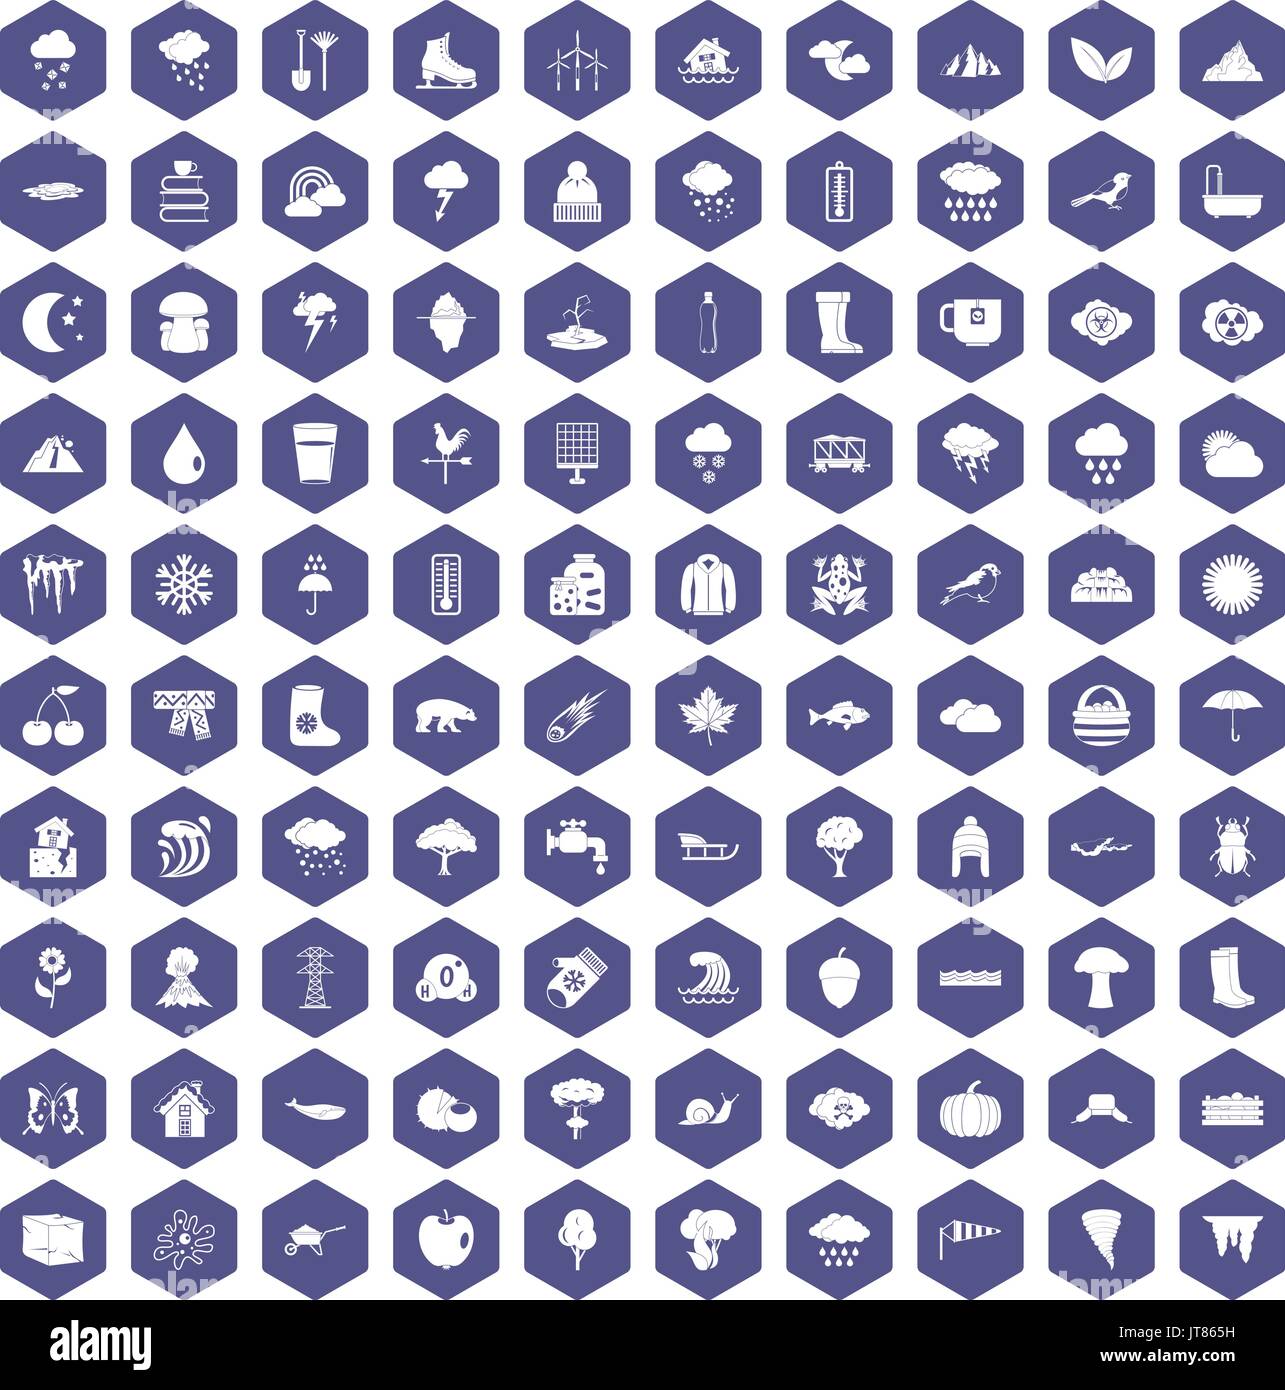 100 clouds icons hexagon purple Stock Vector